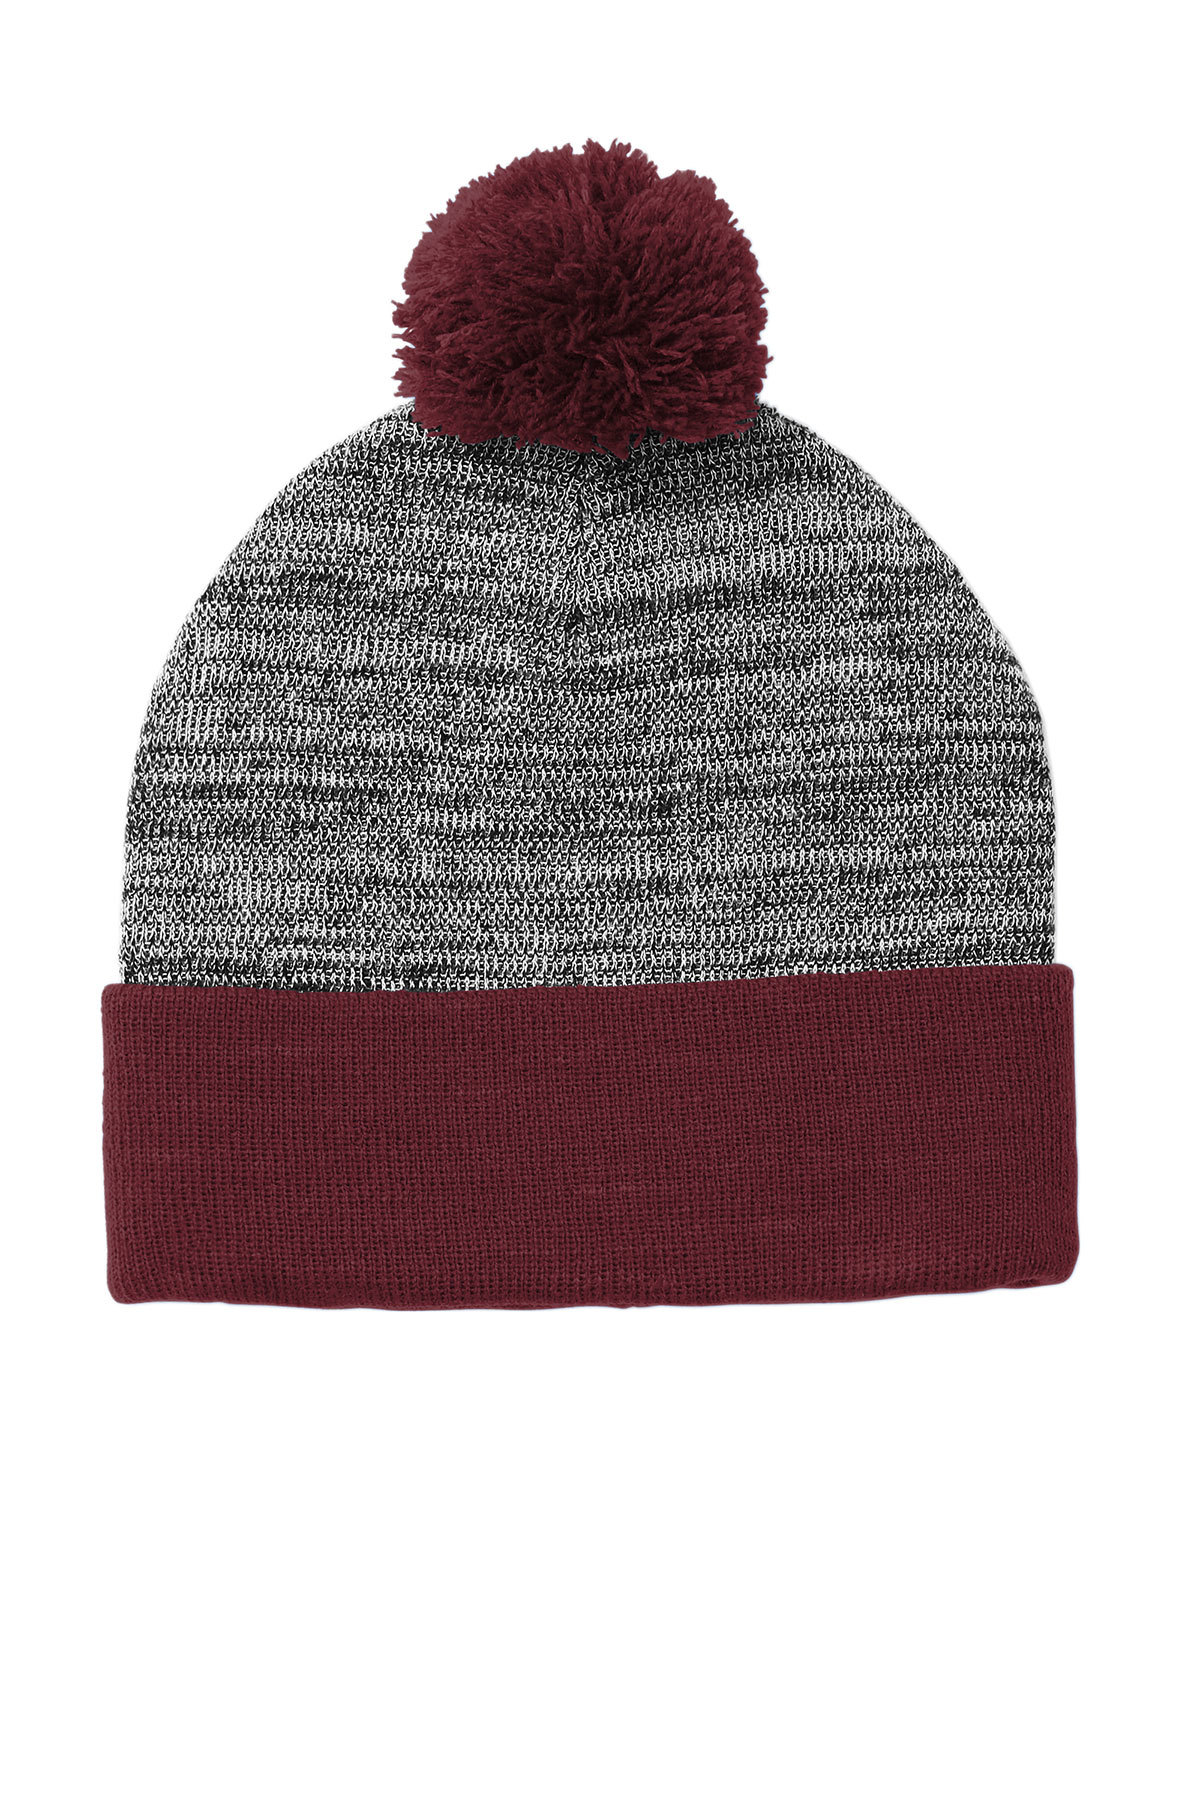 click to view Maroon/ Grey Heather